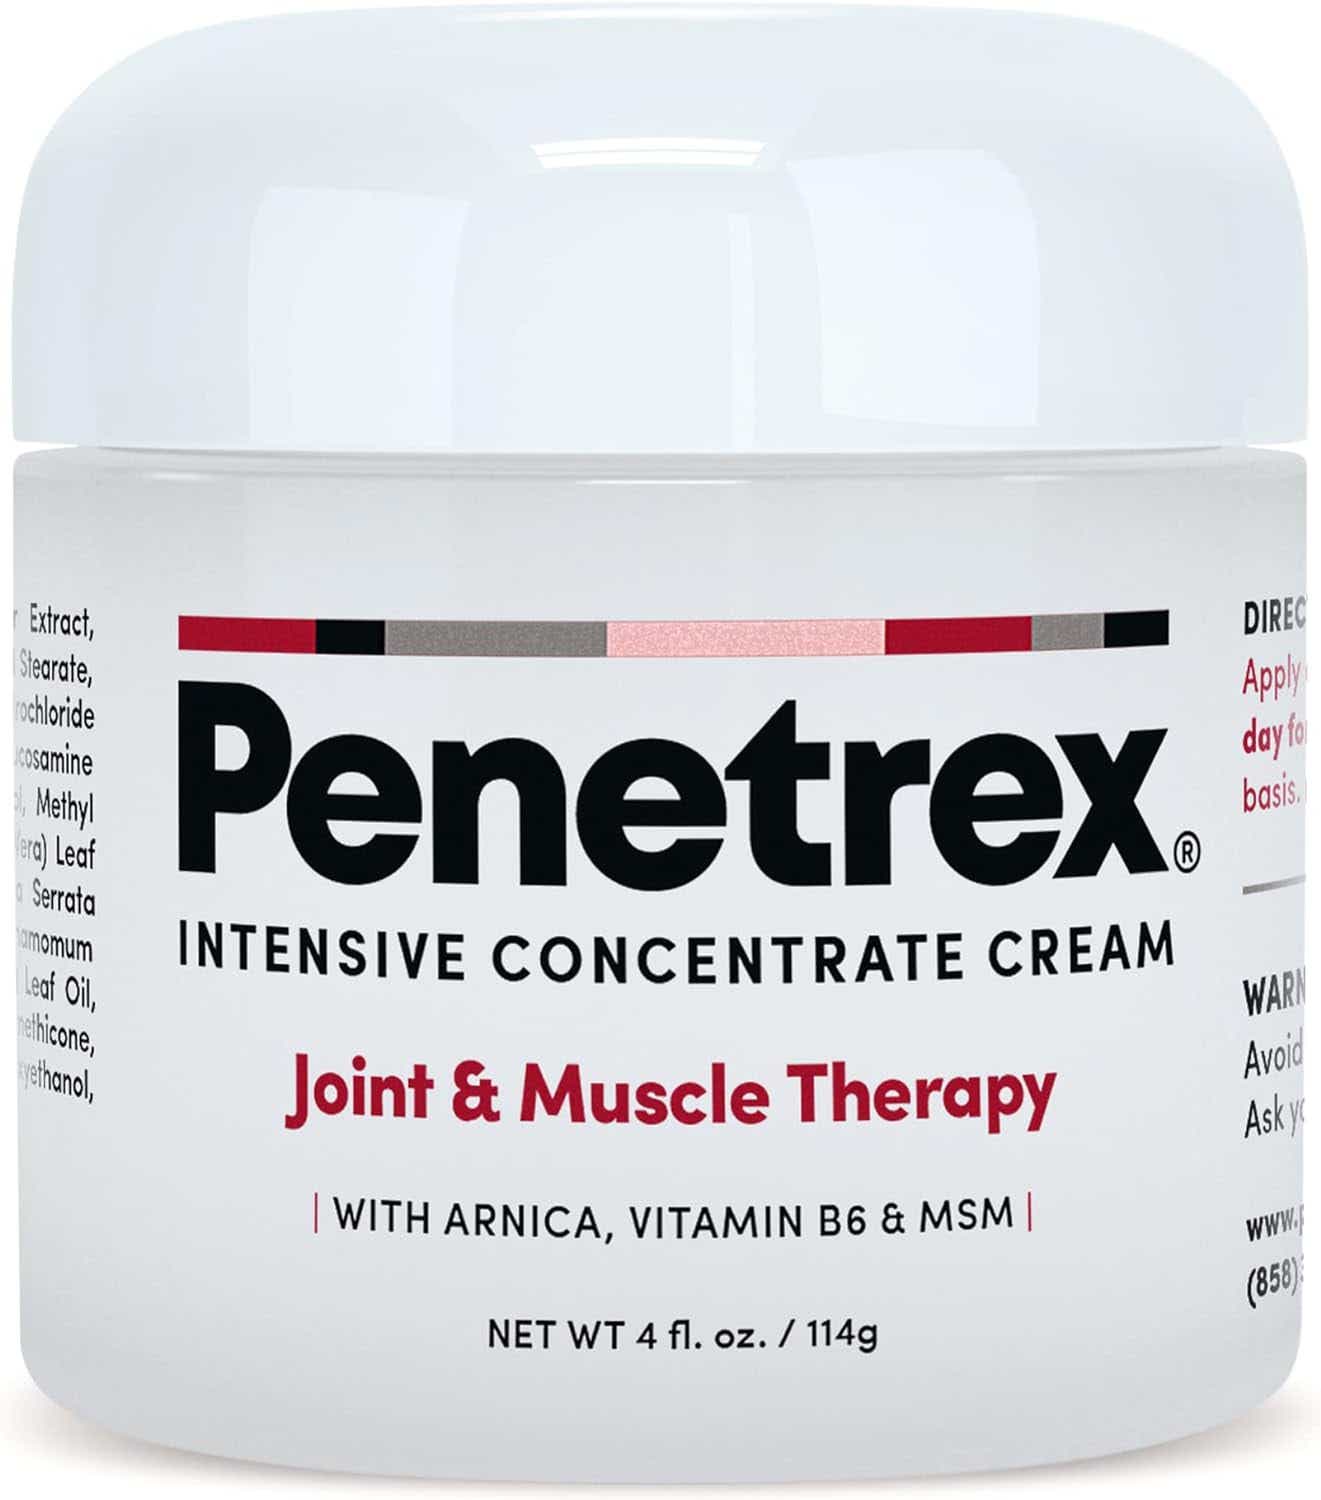 Penetrex Joint & Muscle Therapy